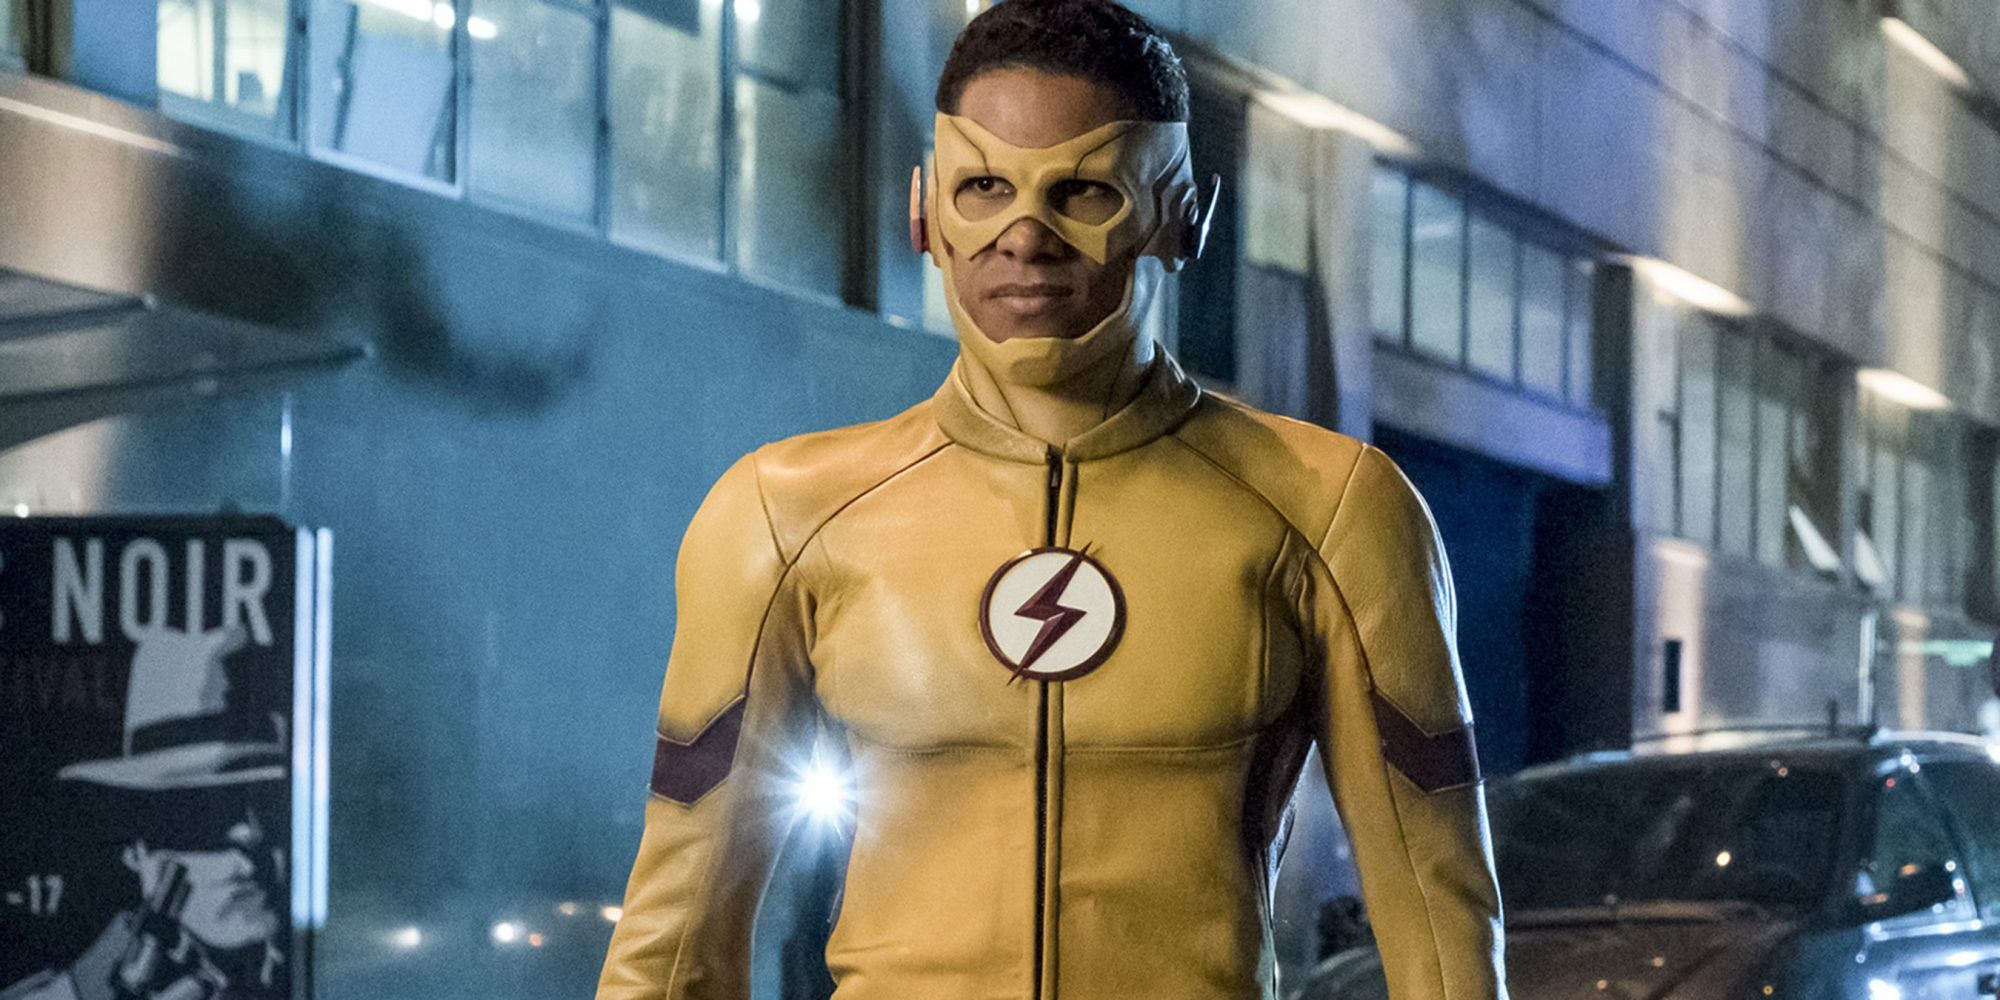 Wally West as Kid Flash on The Flash.